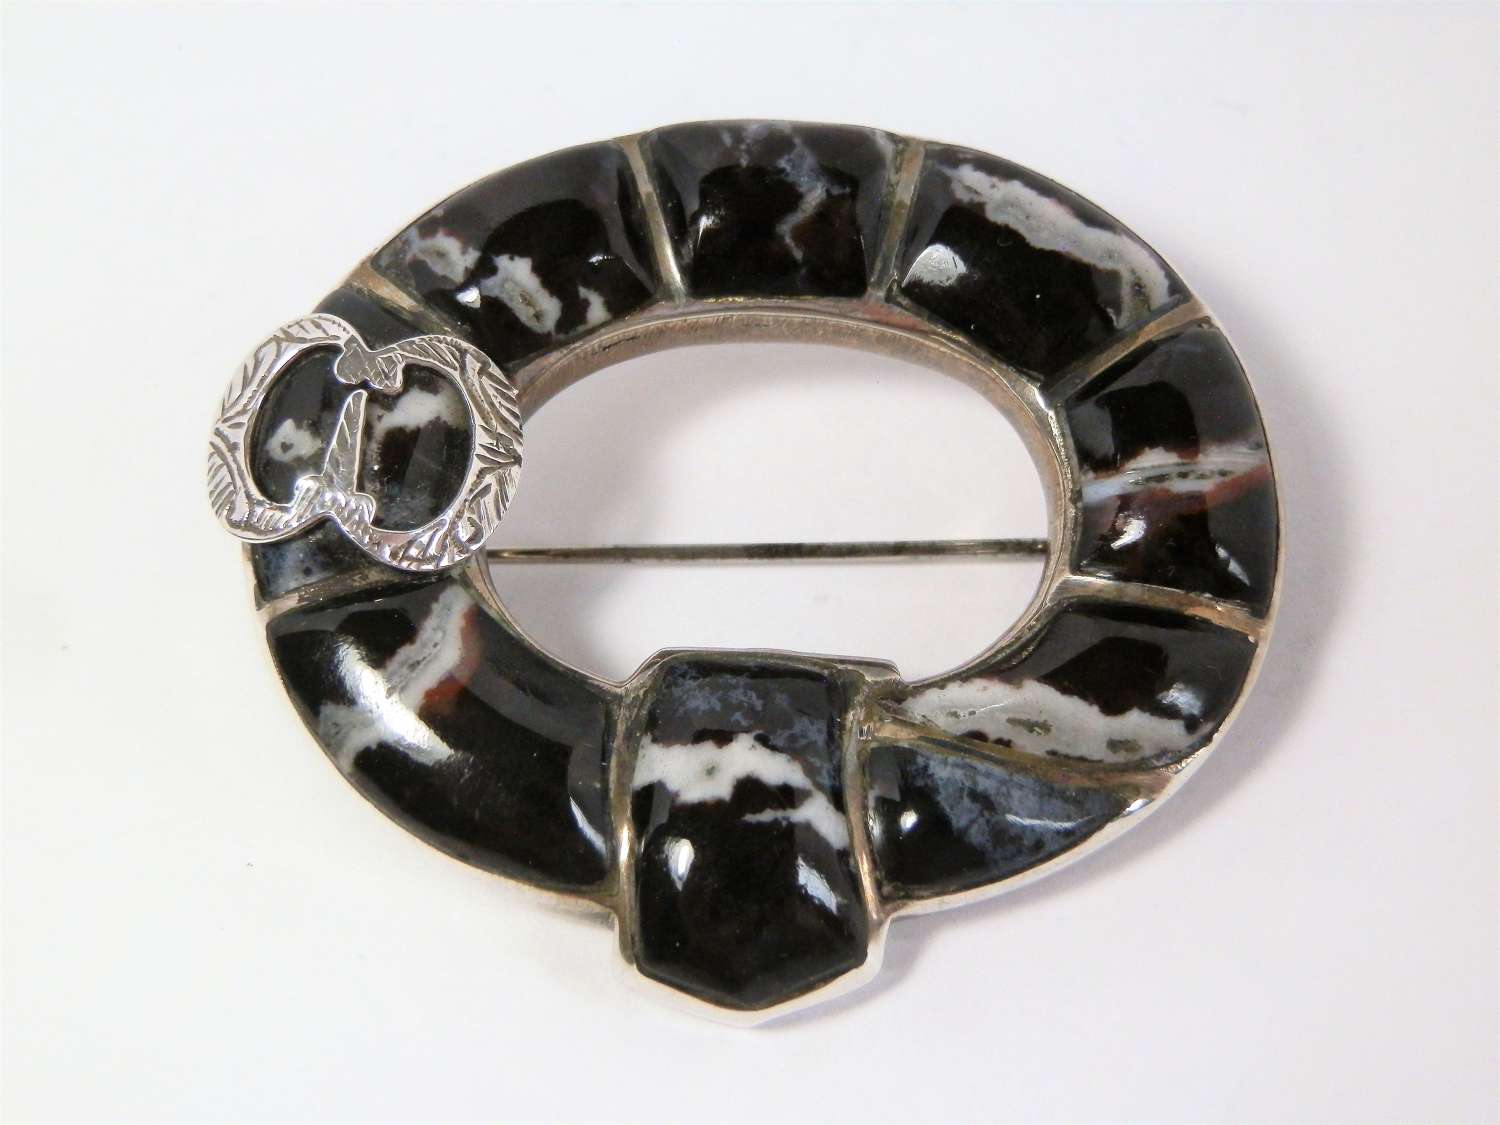 Scottish silver and agate buckle style brooch, c.1880